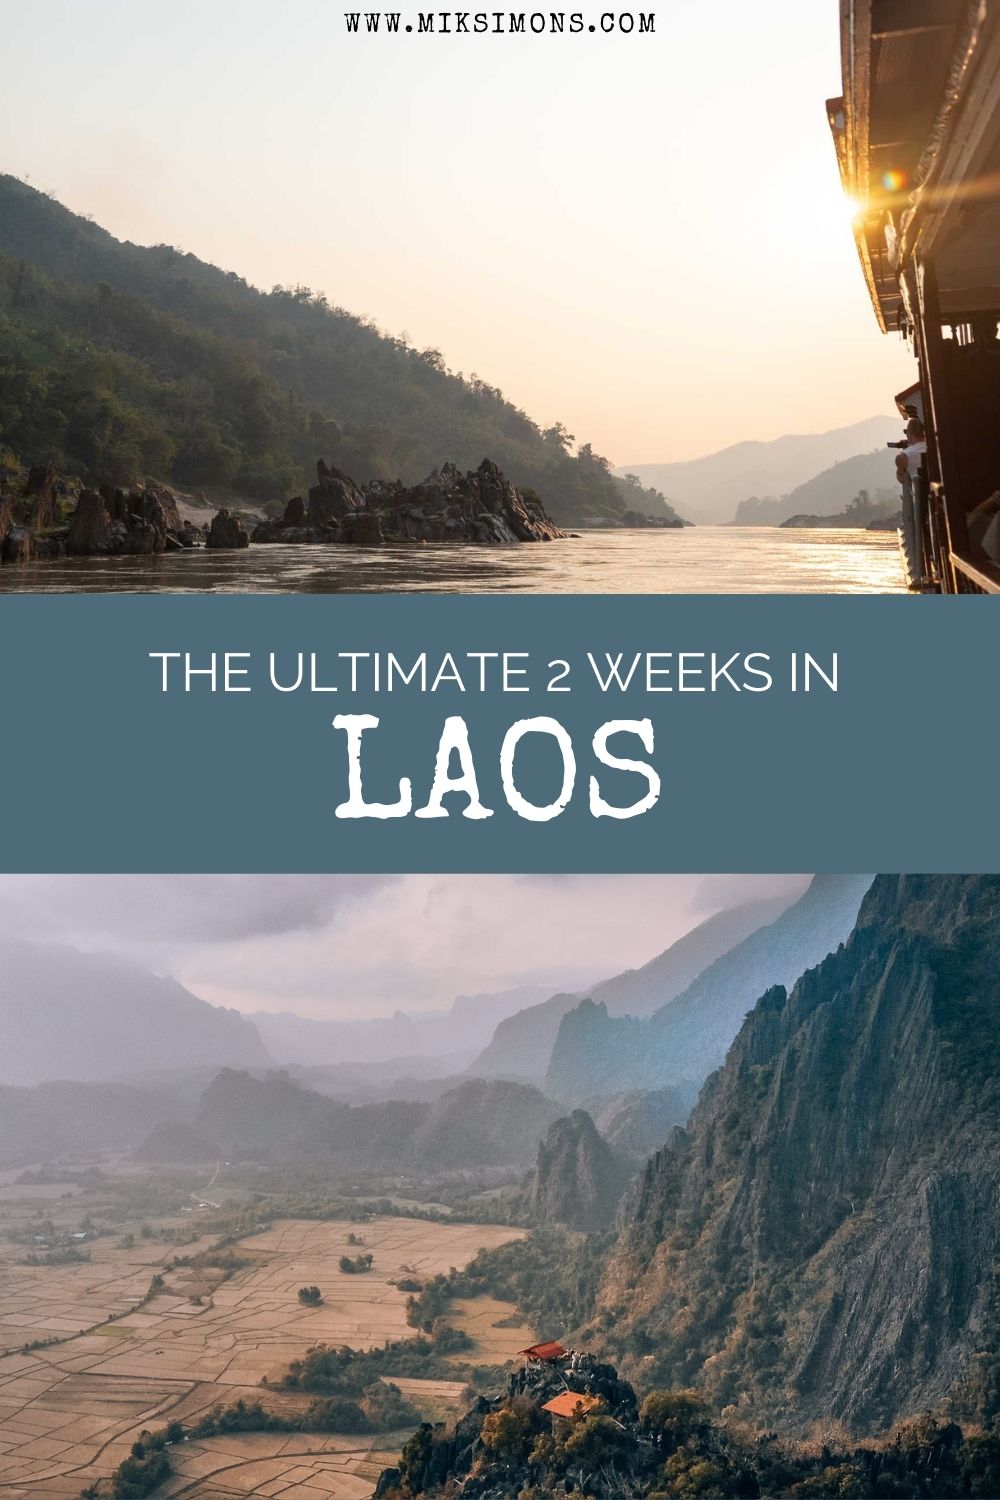 BACKPACKING IN LAOS - THE BEST 2 WEEKS IN LAOS ITINERARY3